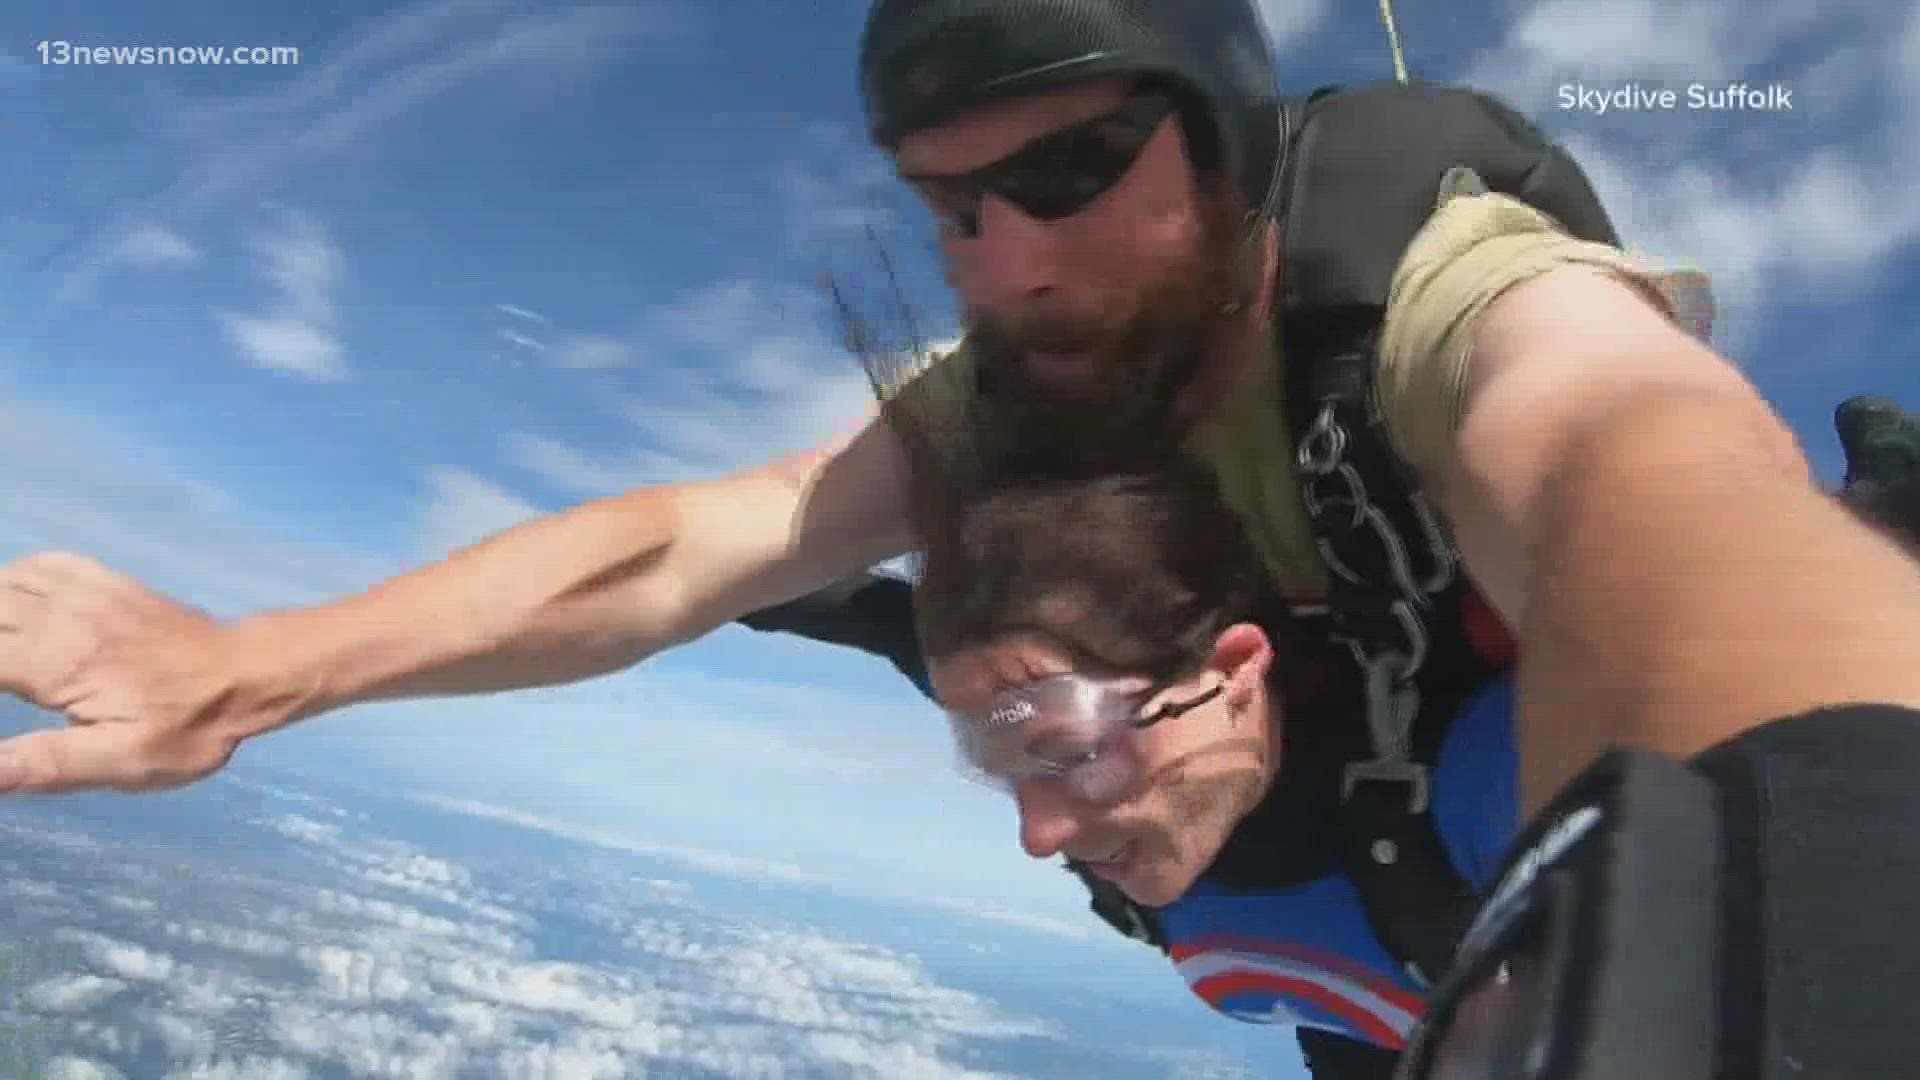 Skydiving Gift Certificates: Tips for Gifting an Amazing Experience